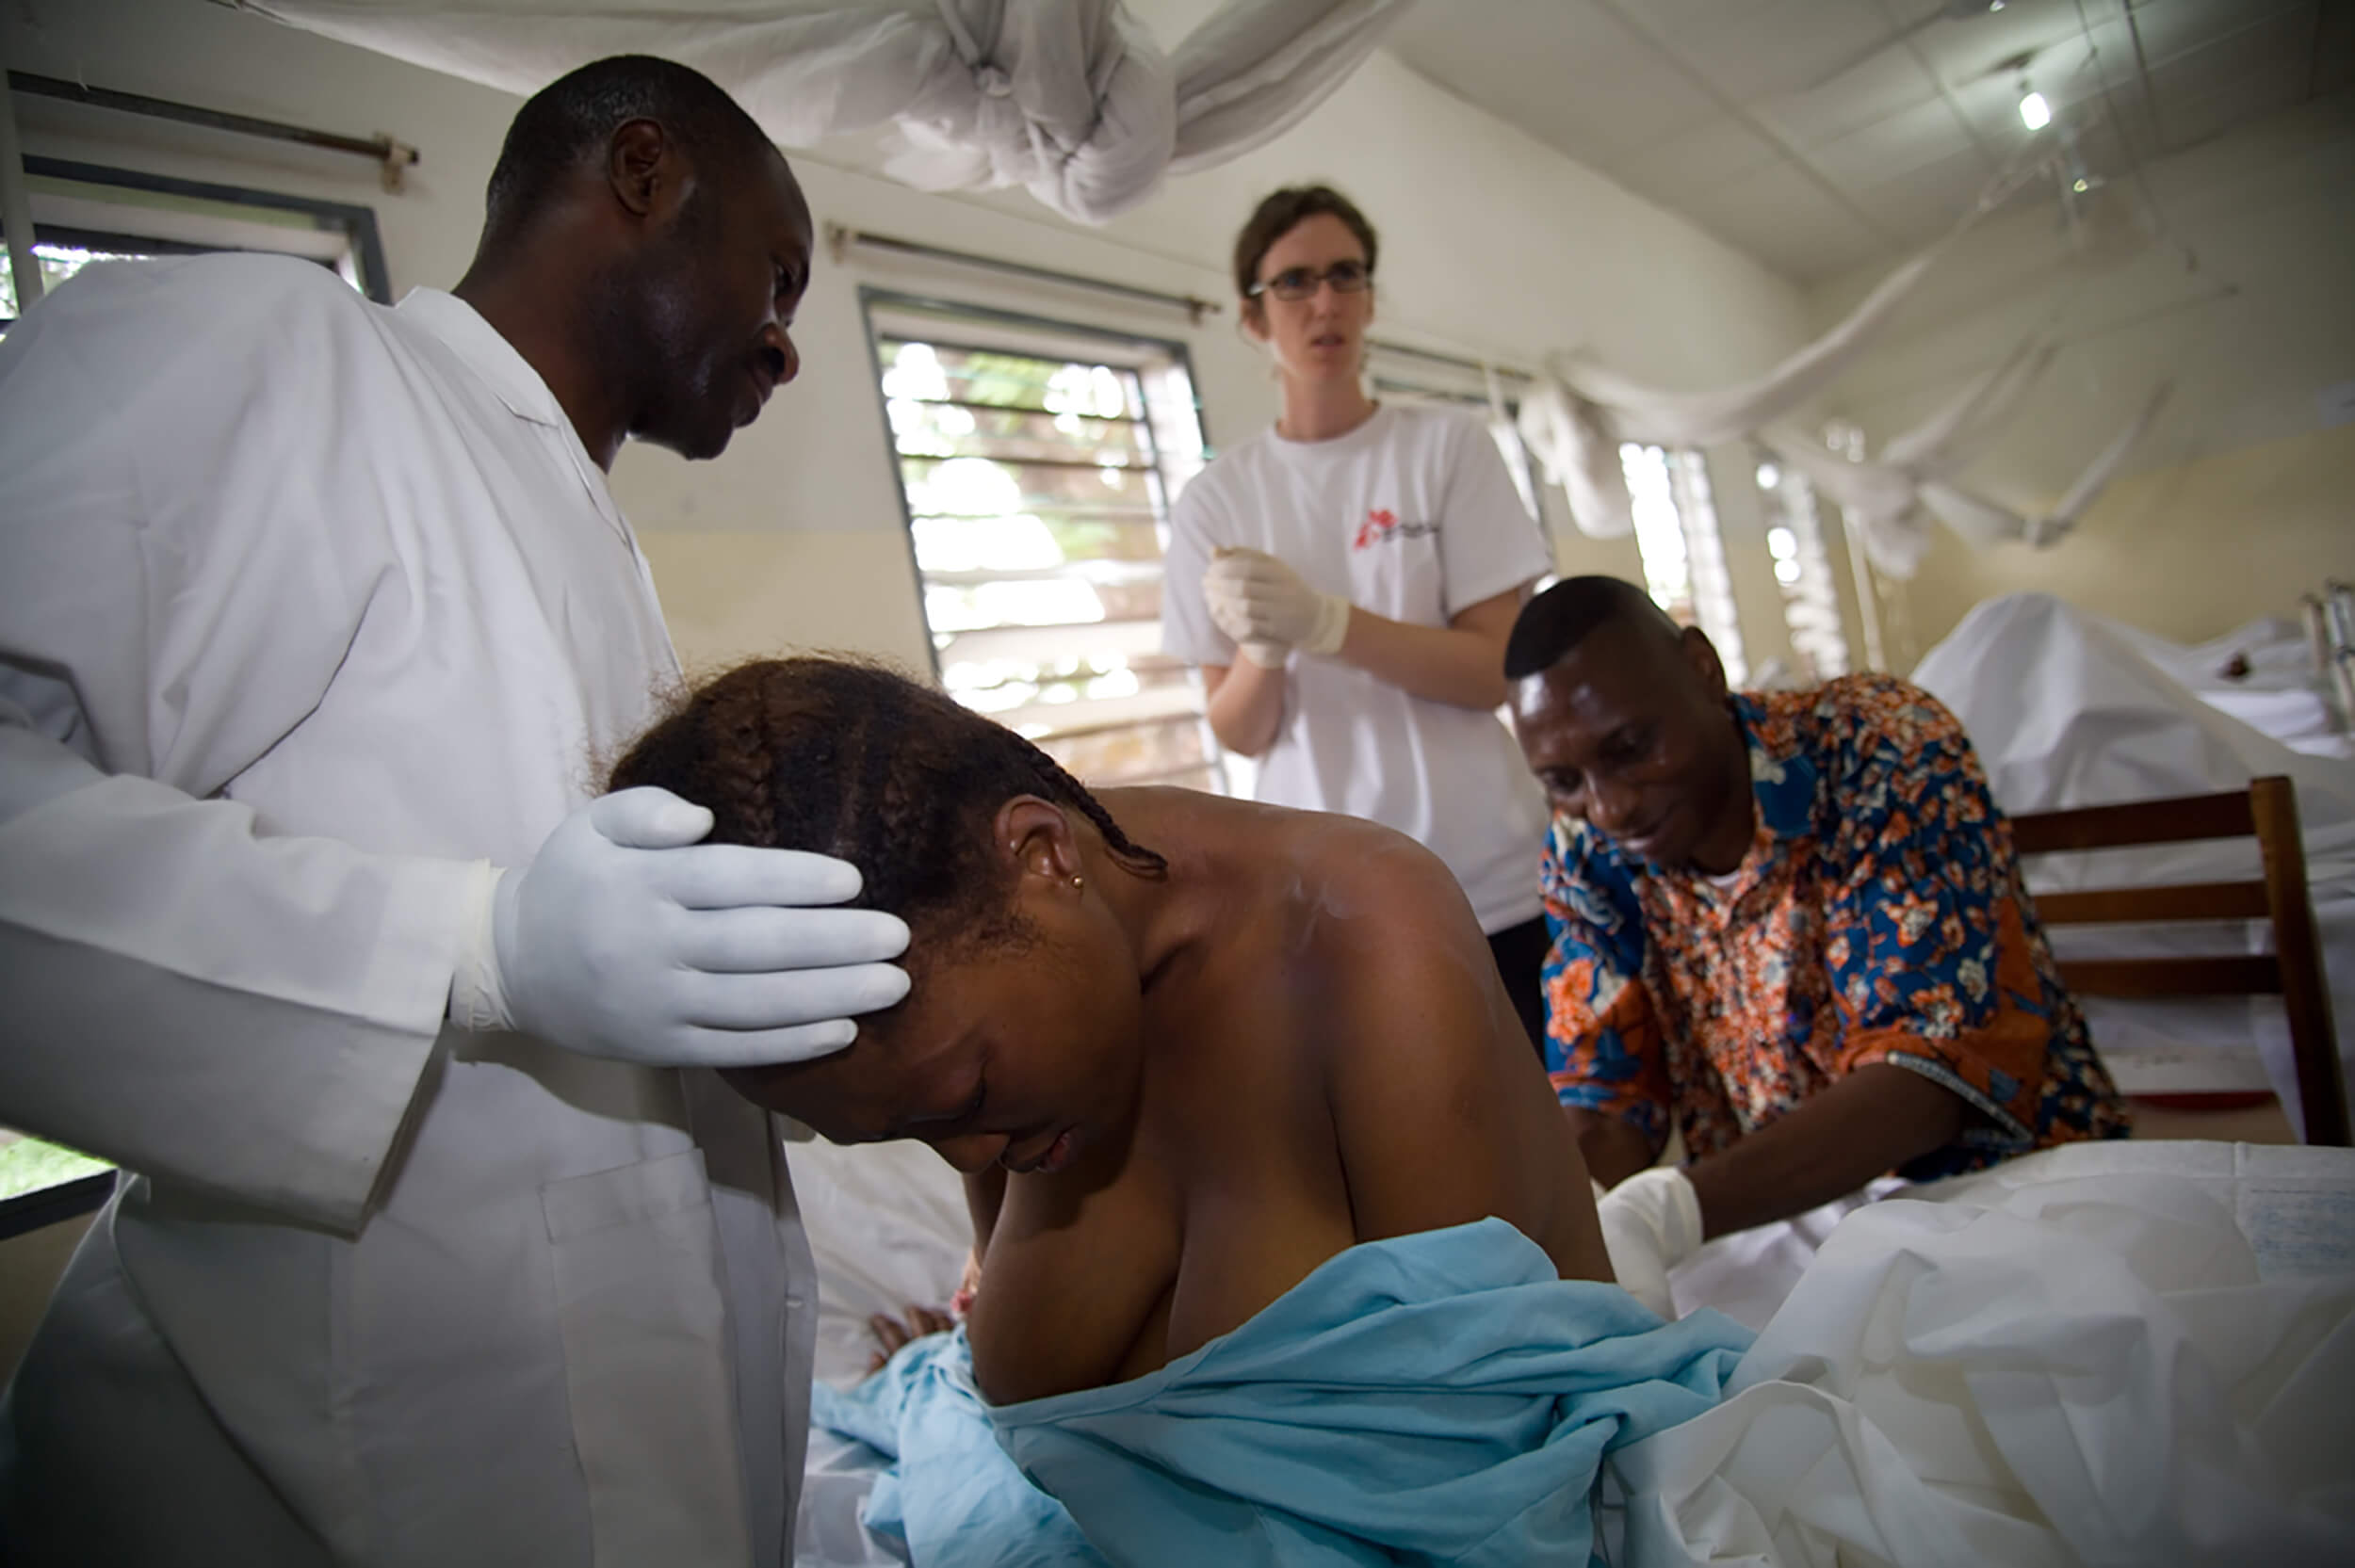  Democratic Republic of Kongo. DRC. A lumbar puncture is performed on an HIV-patient in order to diagnose infections. 